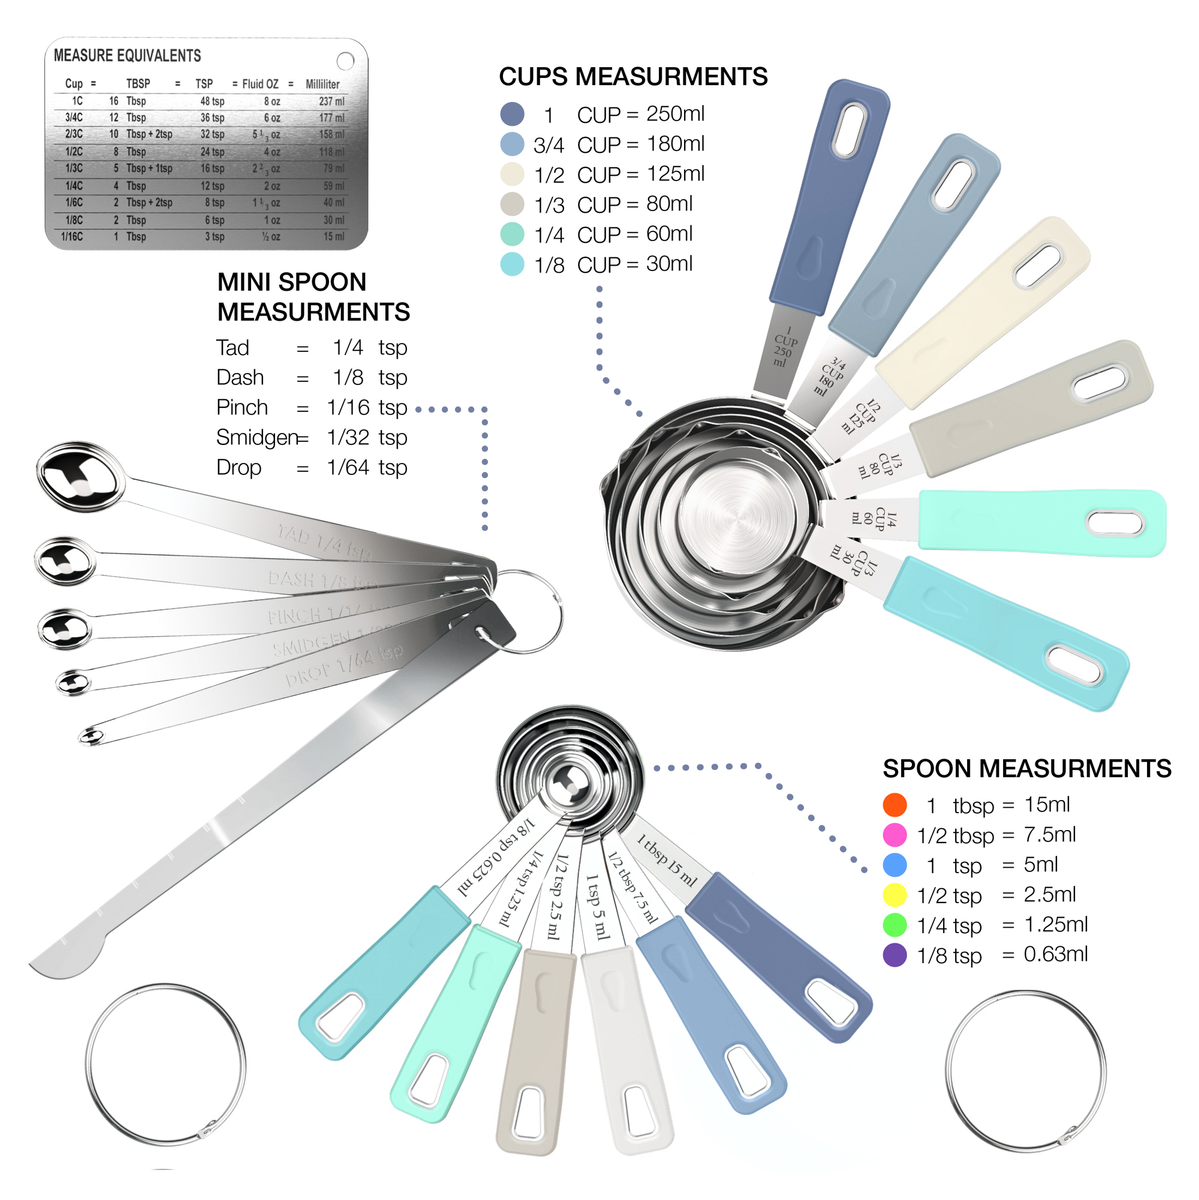 22-Piece Stainless Steel Measuring Cups and Spoons Set in Farmhouse